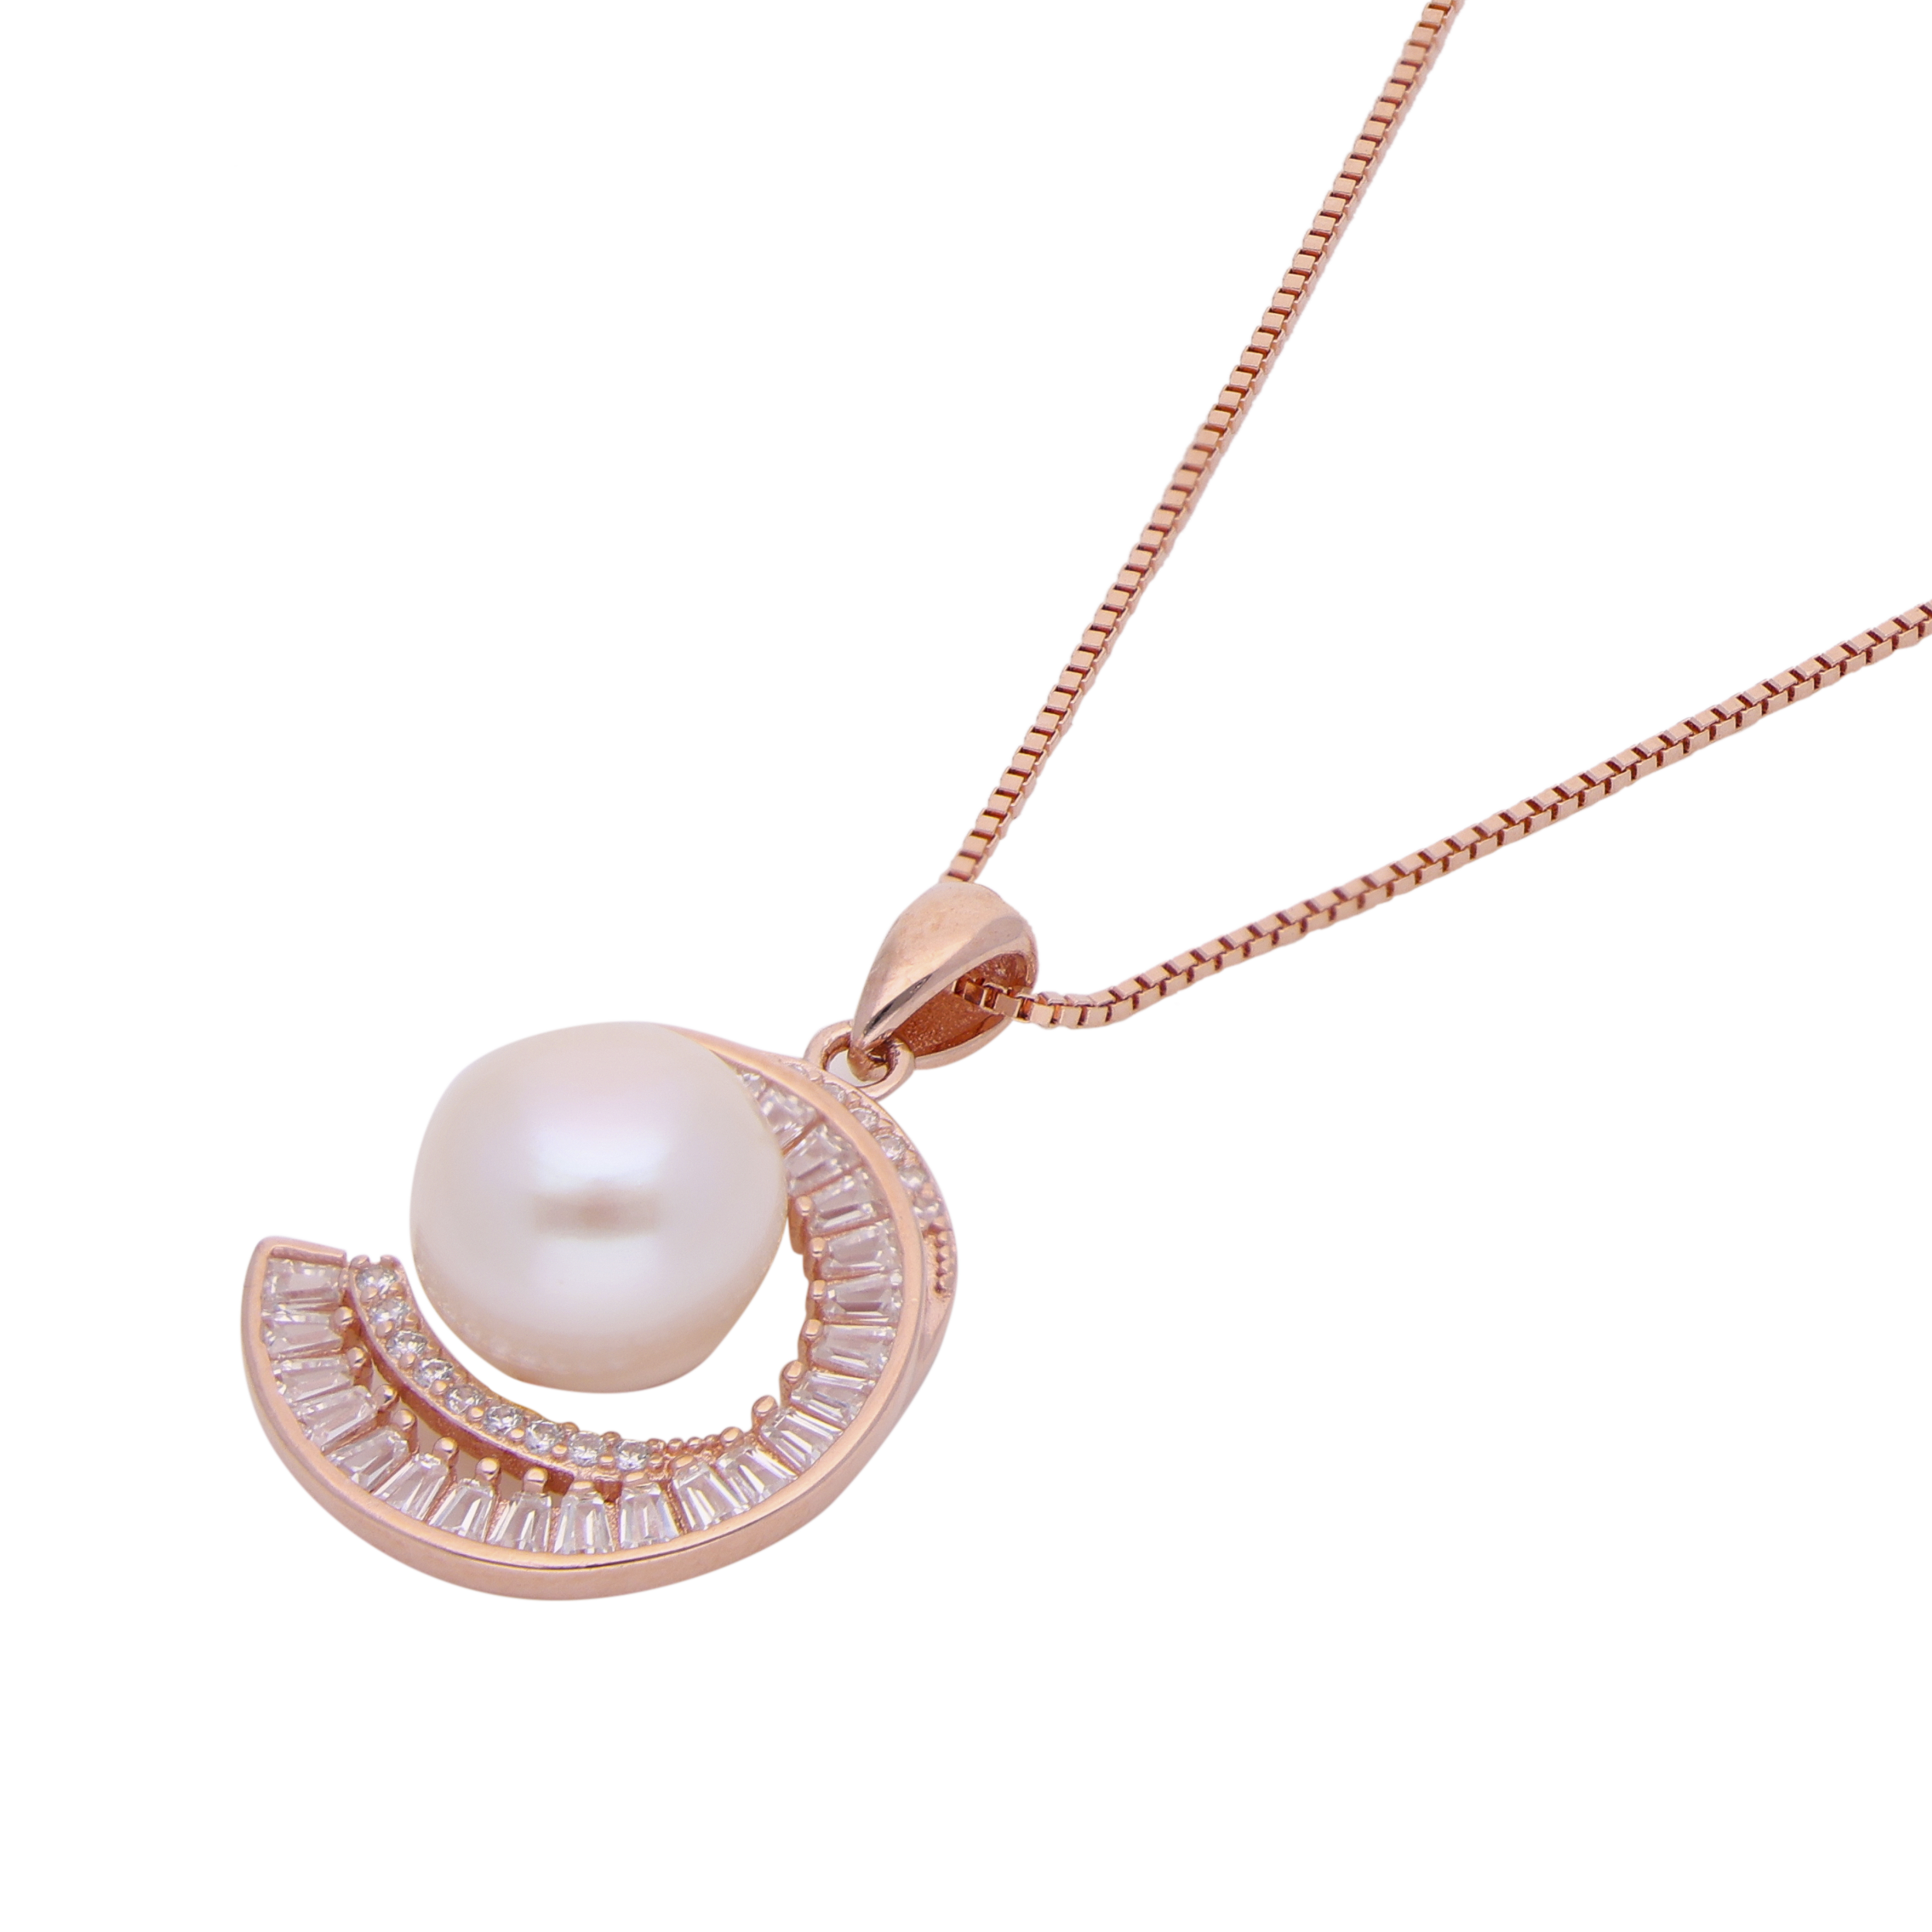 Radiant Rose: Sterling Silver Chain Pendant with Cubic Zirconia and Pearl in Rose Gold | SKU : 0019884097, 0019884073, 0019884134, 0019884110